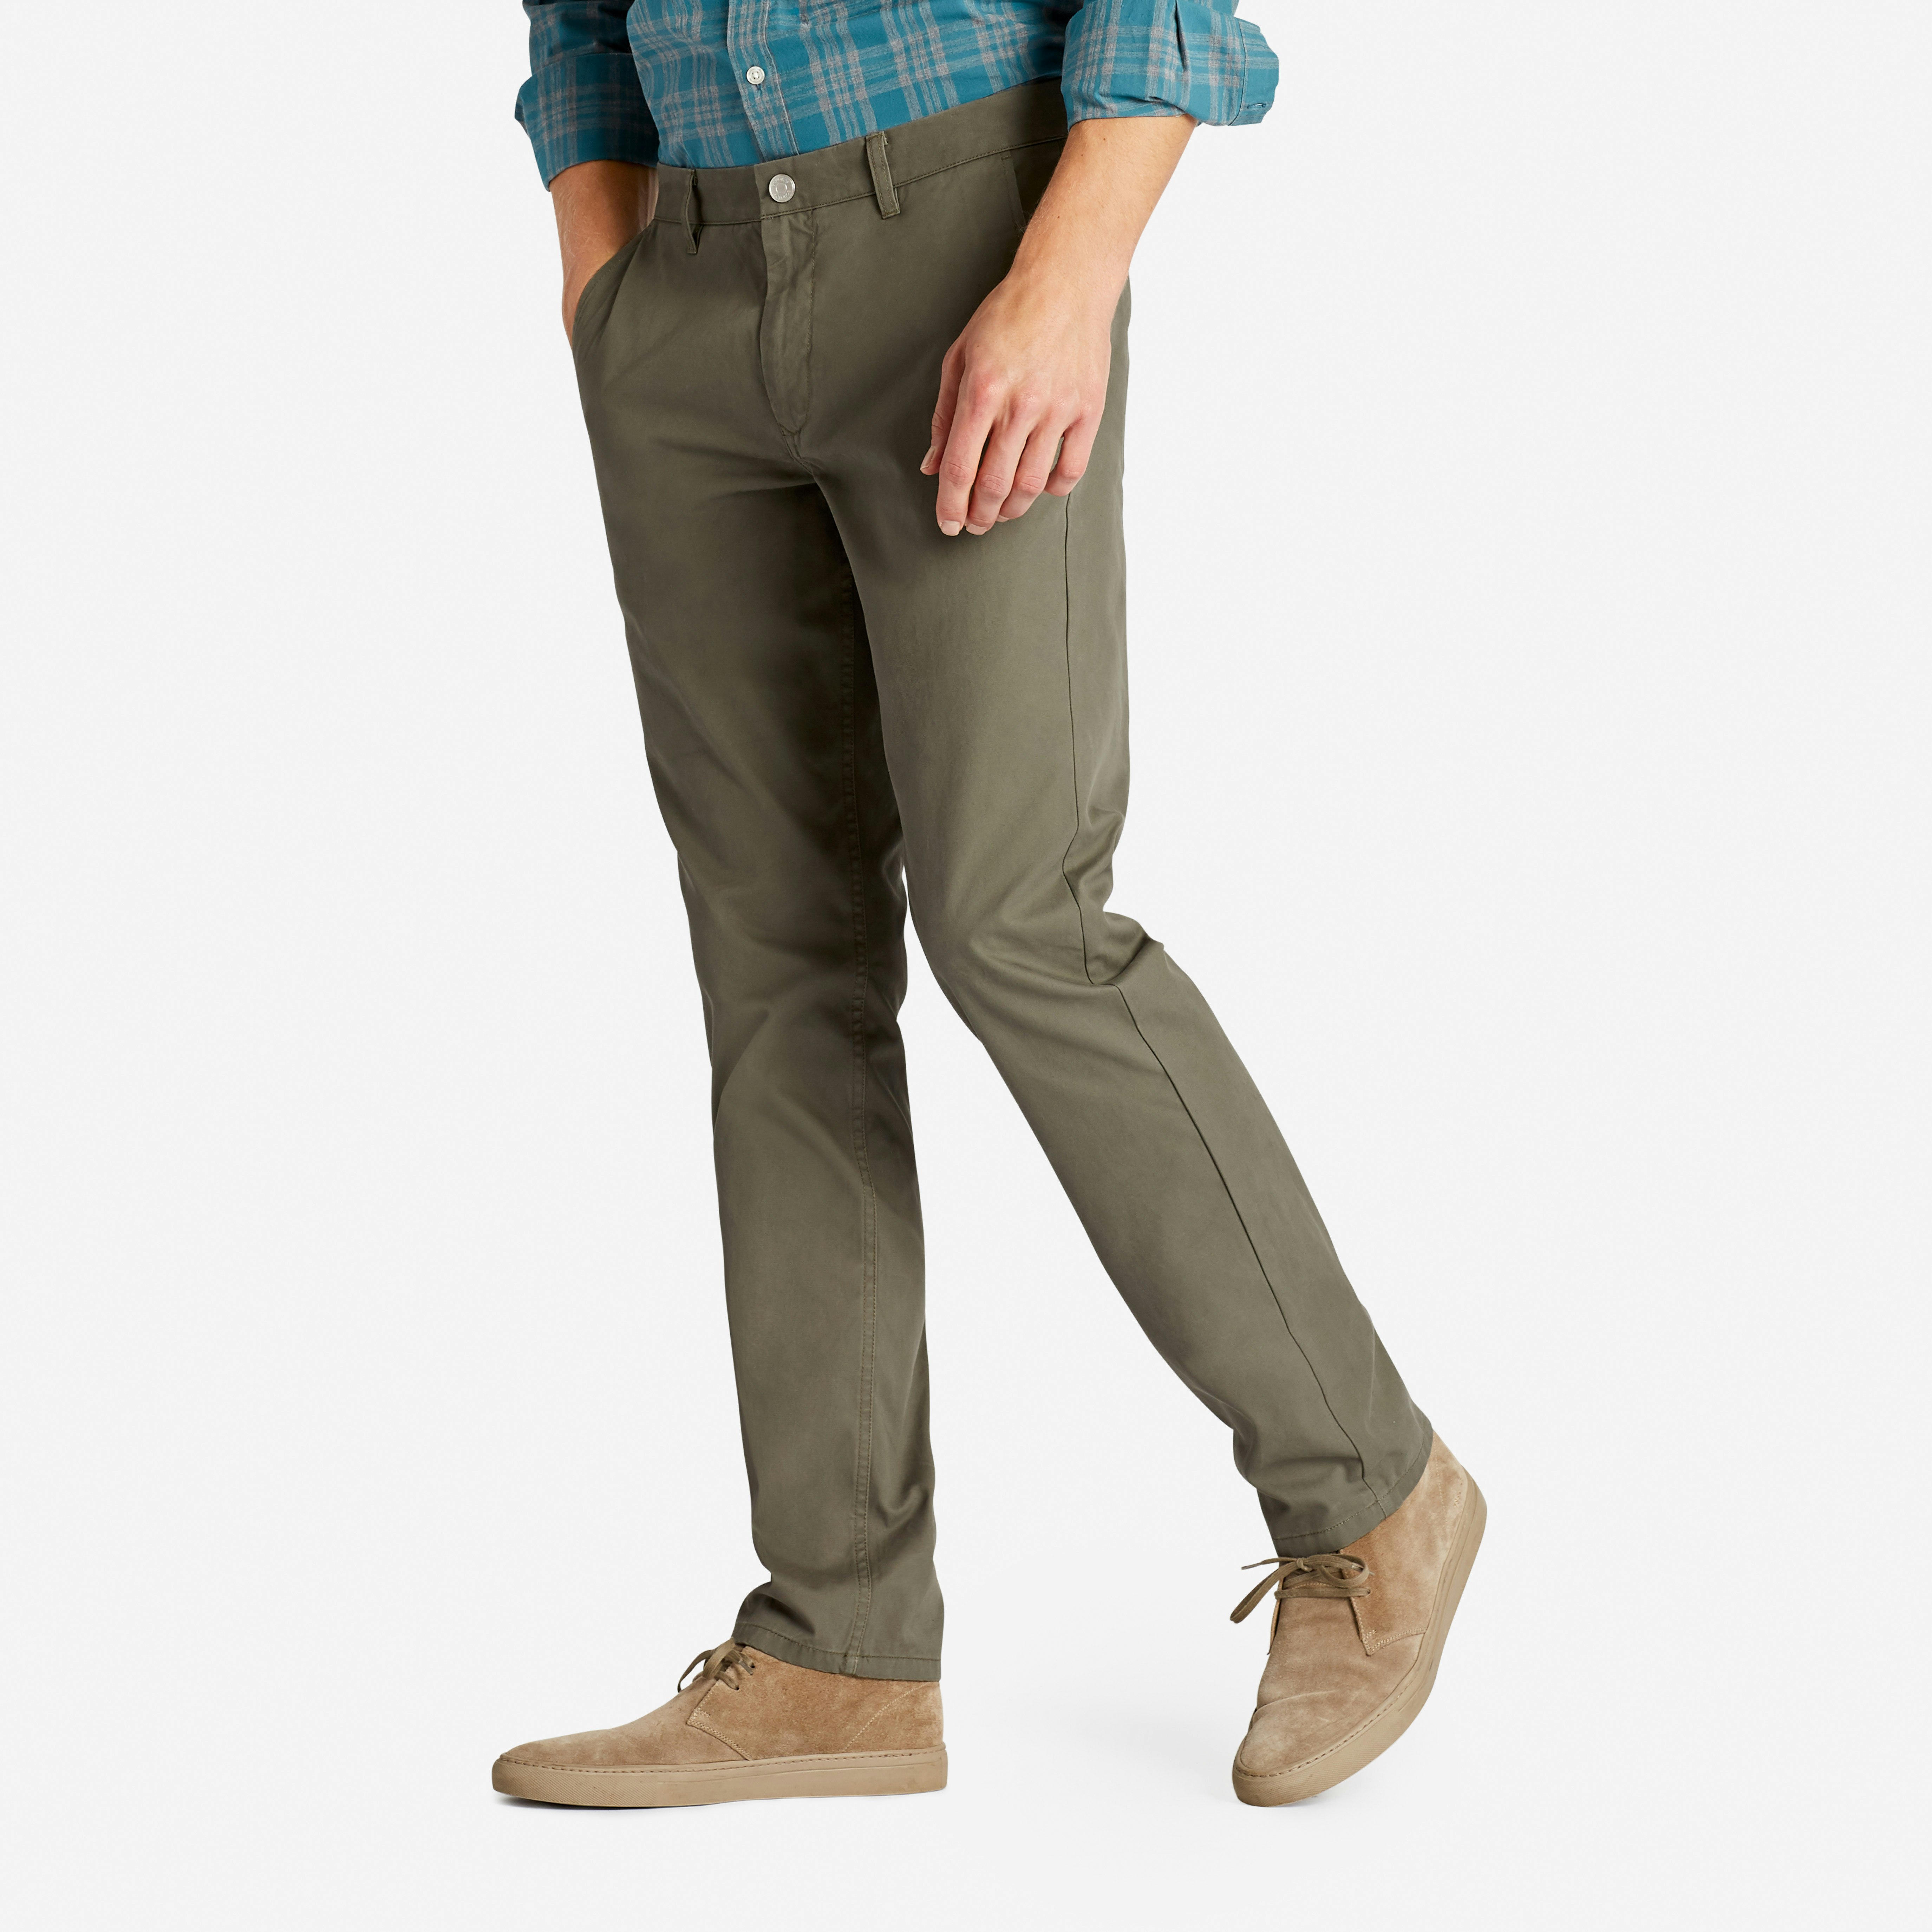 Mens Washed Cotton Chinos | Tailored, Straight, Athletic, Slim Fit ...